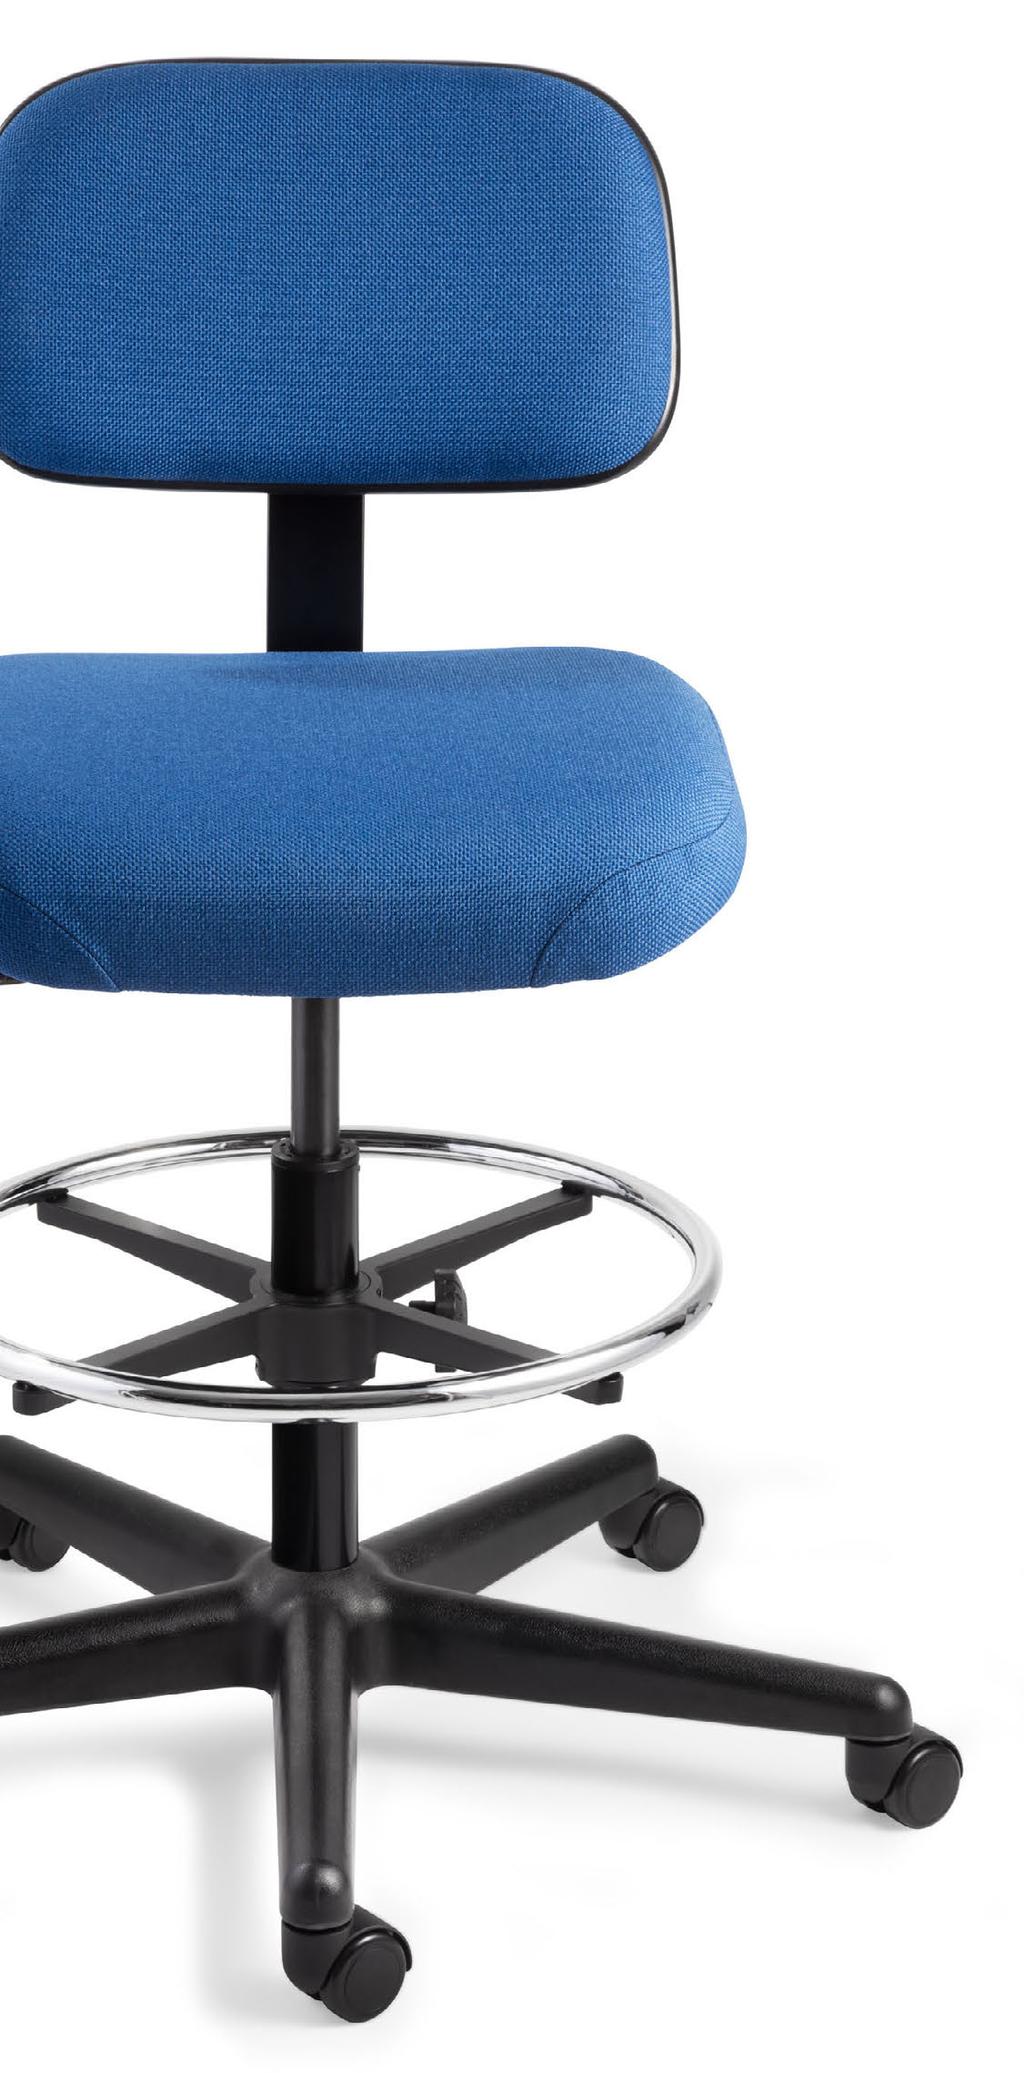 UPHOLSTERED CHAIRS 8000 Series - ESD 5000 Series - Standard, CR, ECR DORAL SERIES BEVCO s DORAL series feature ergonomic upholstered chairs that adjust to fit most body types and workstations.